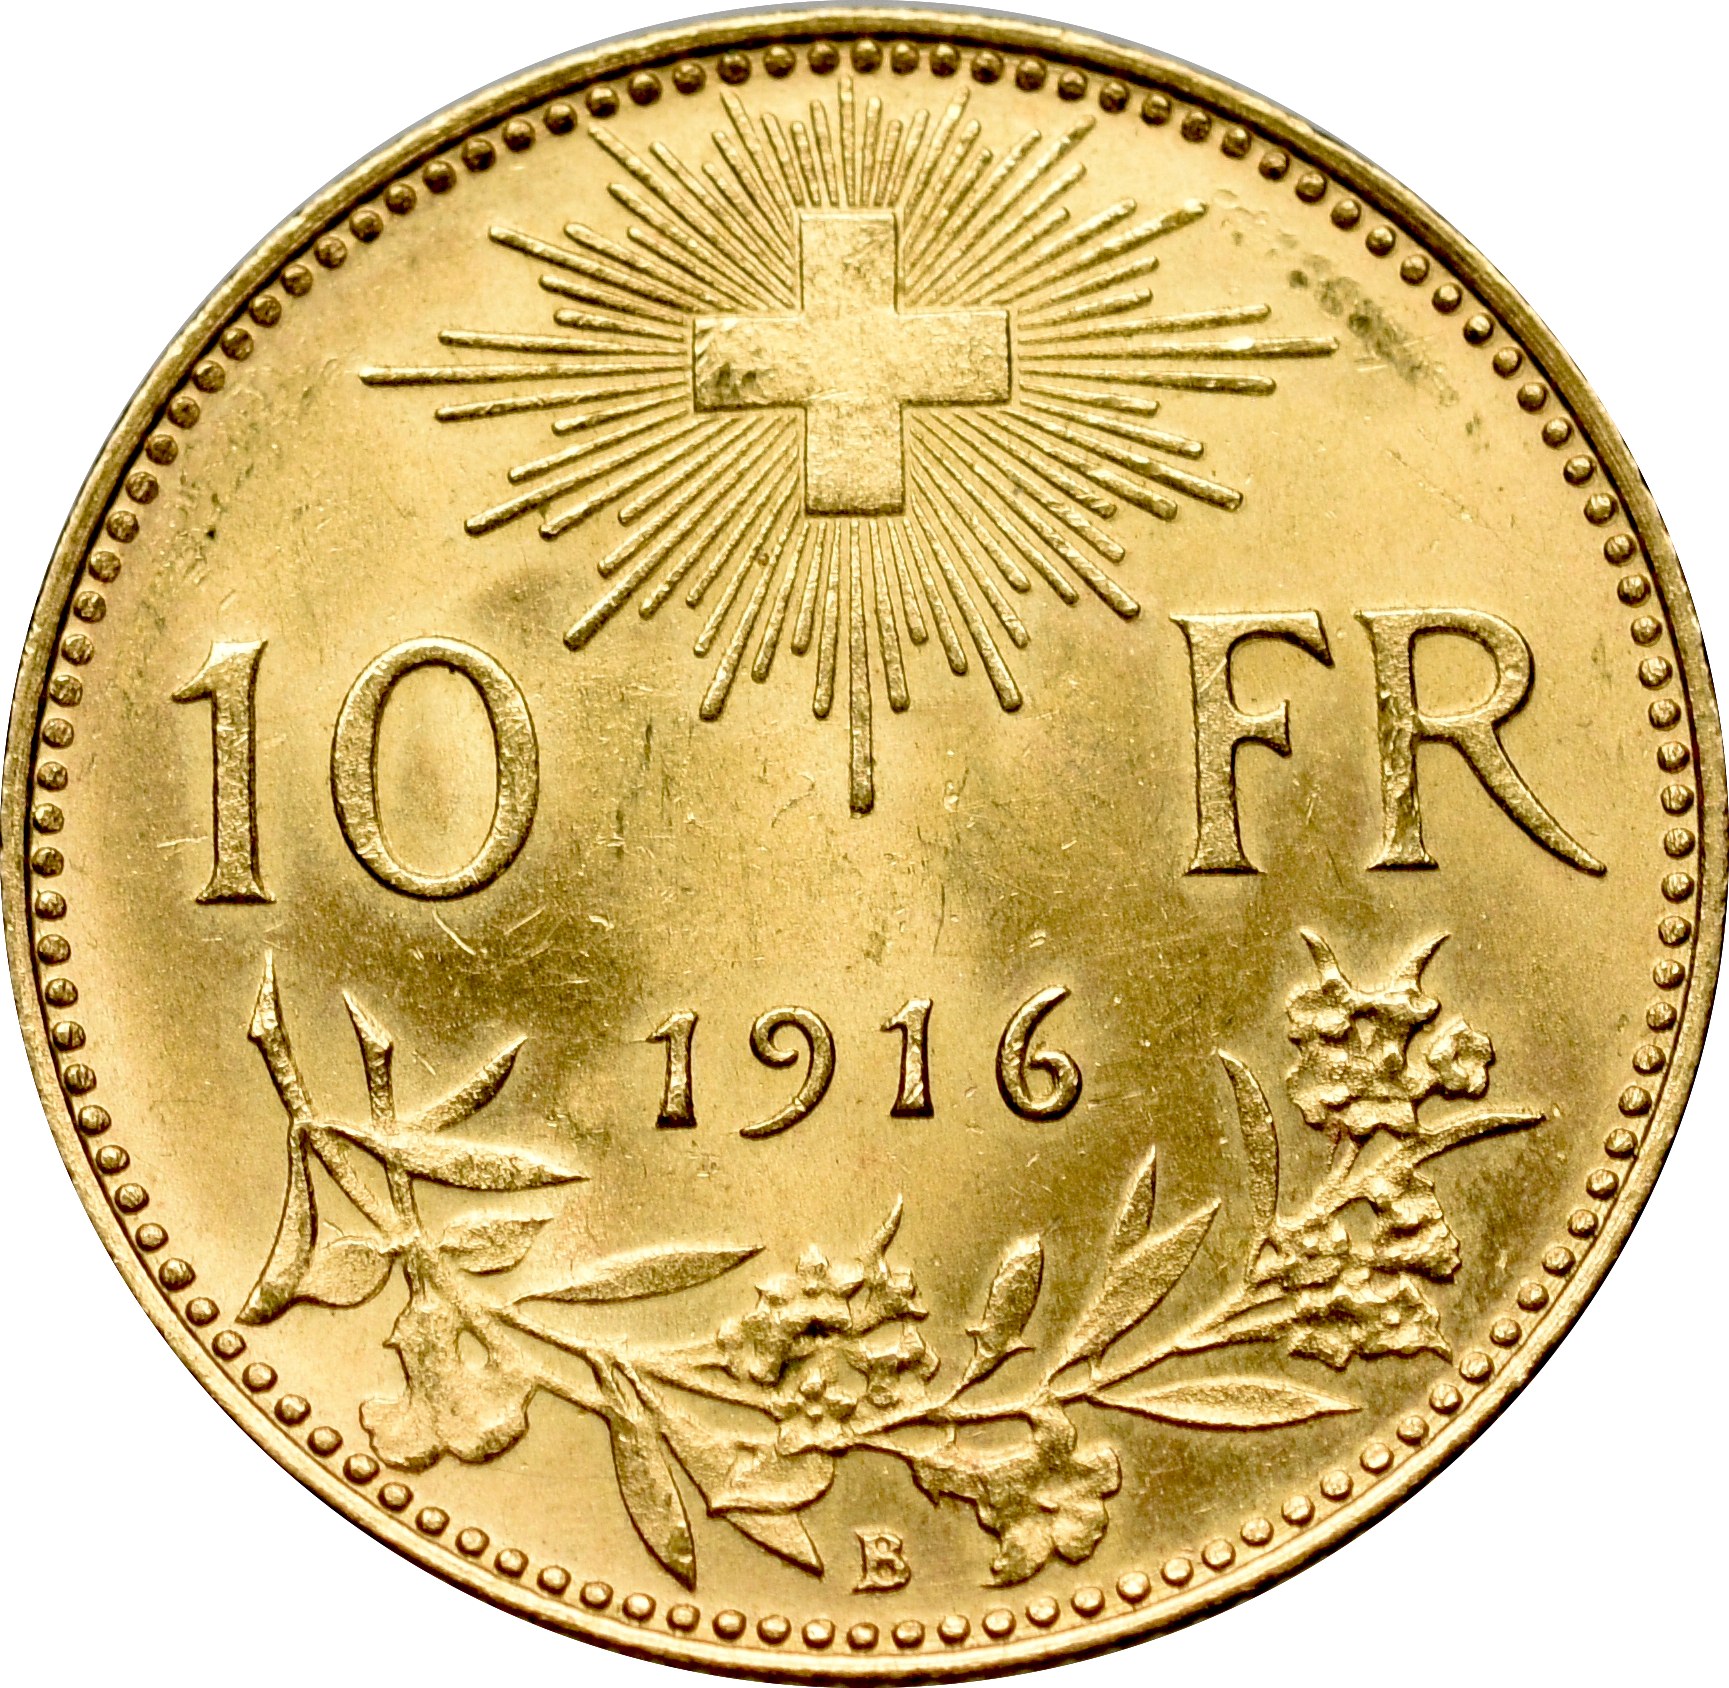 At our Auction 7 – review of gold coins